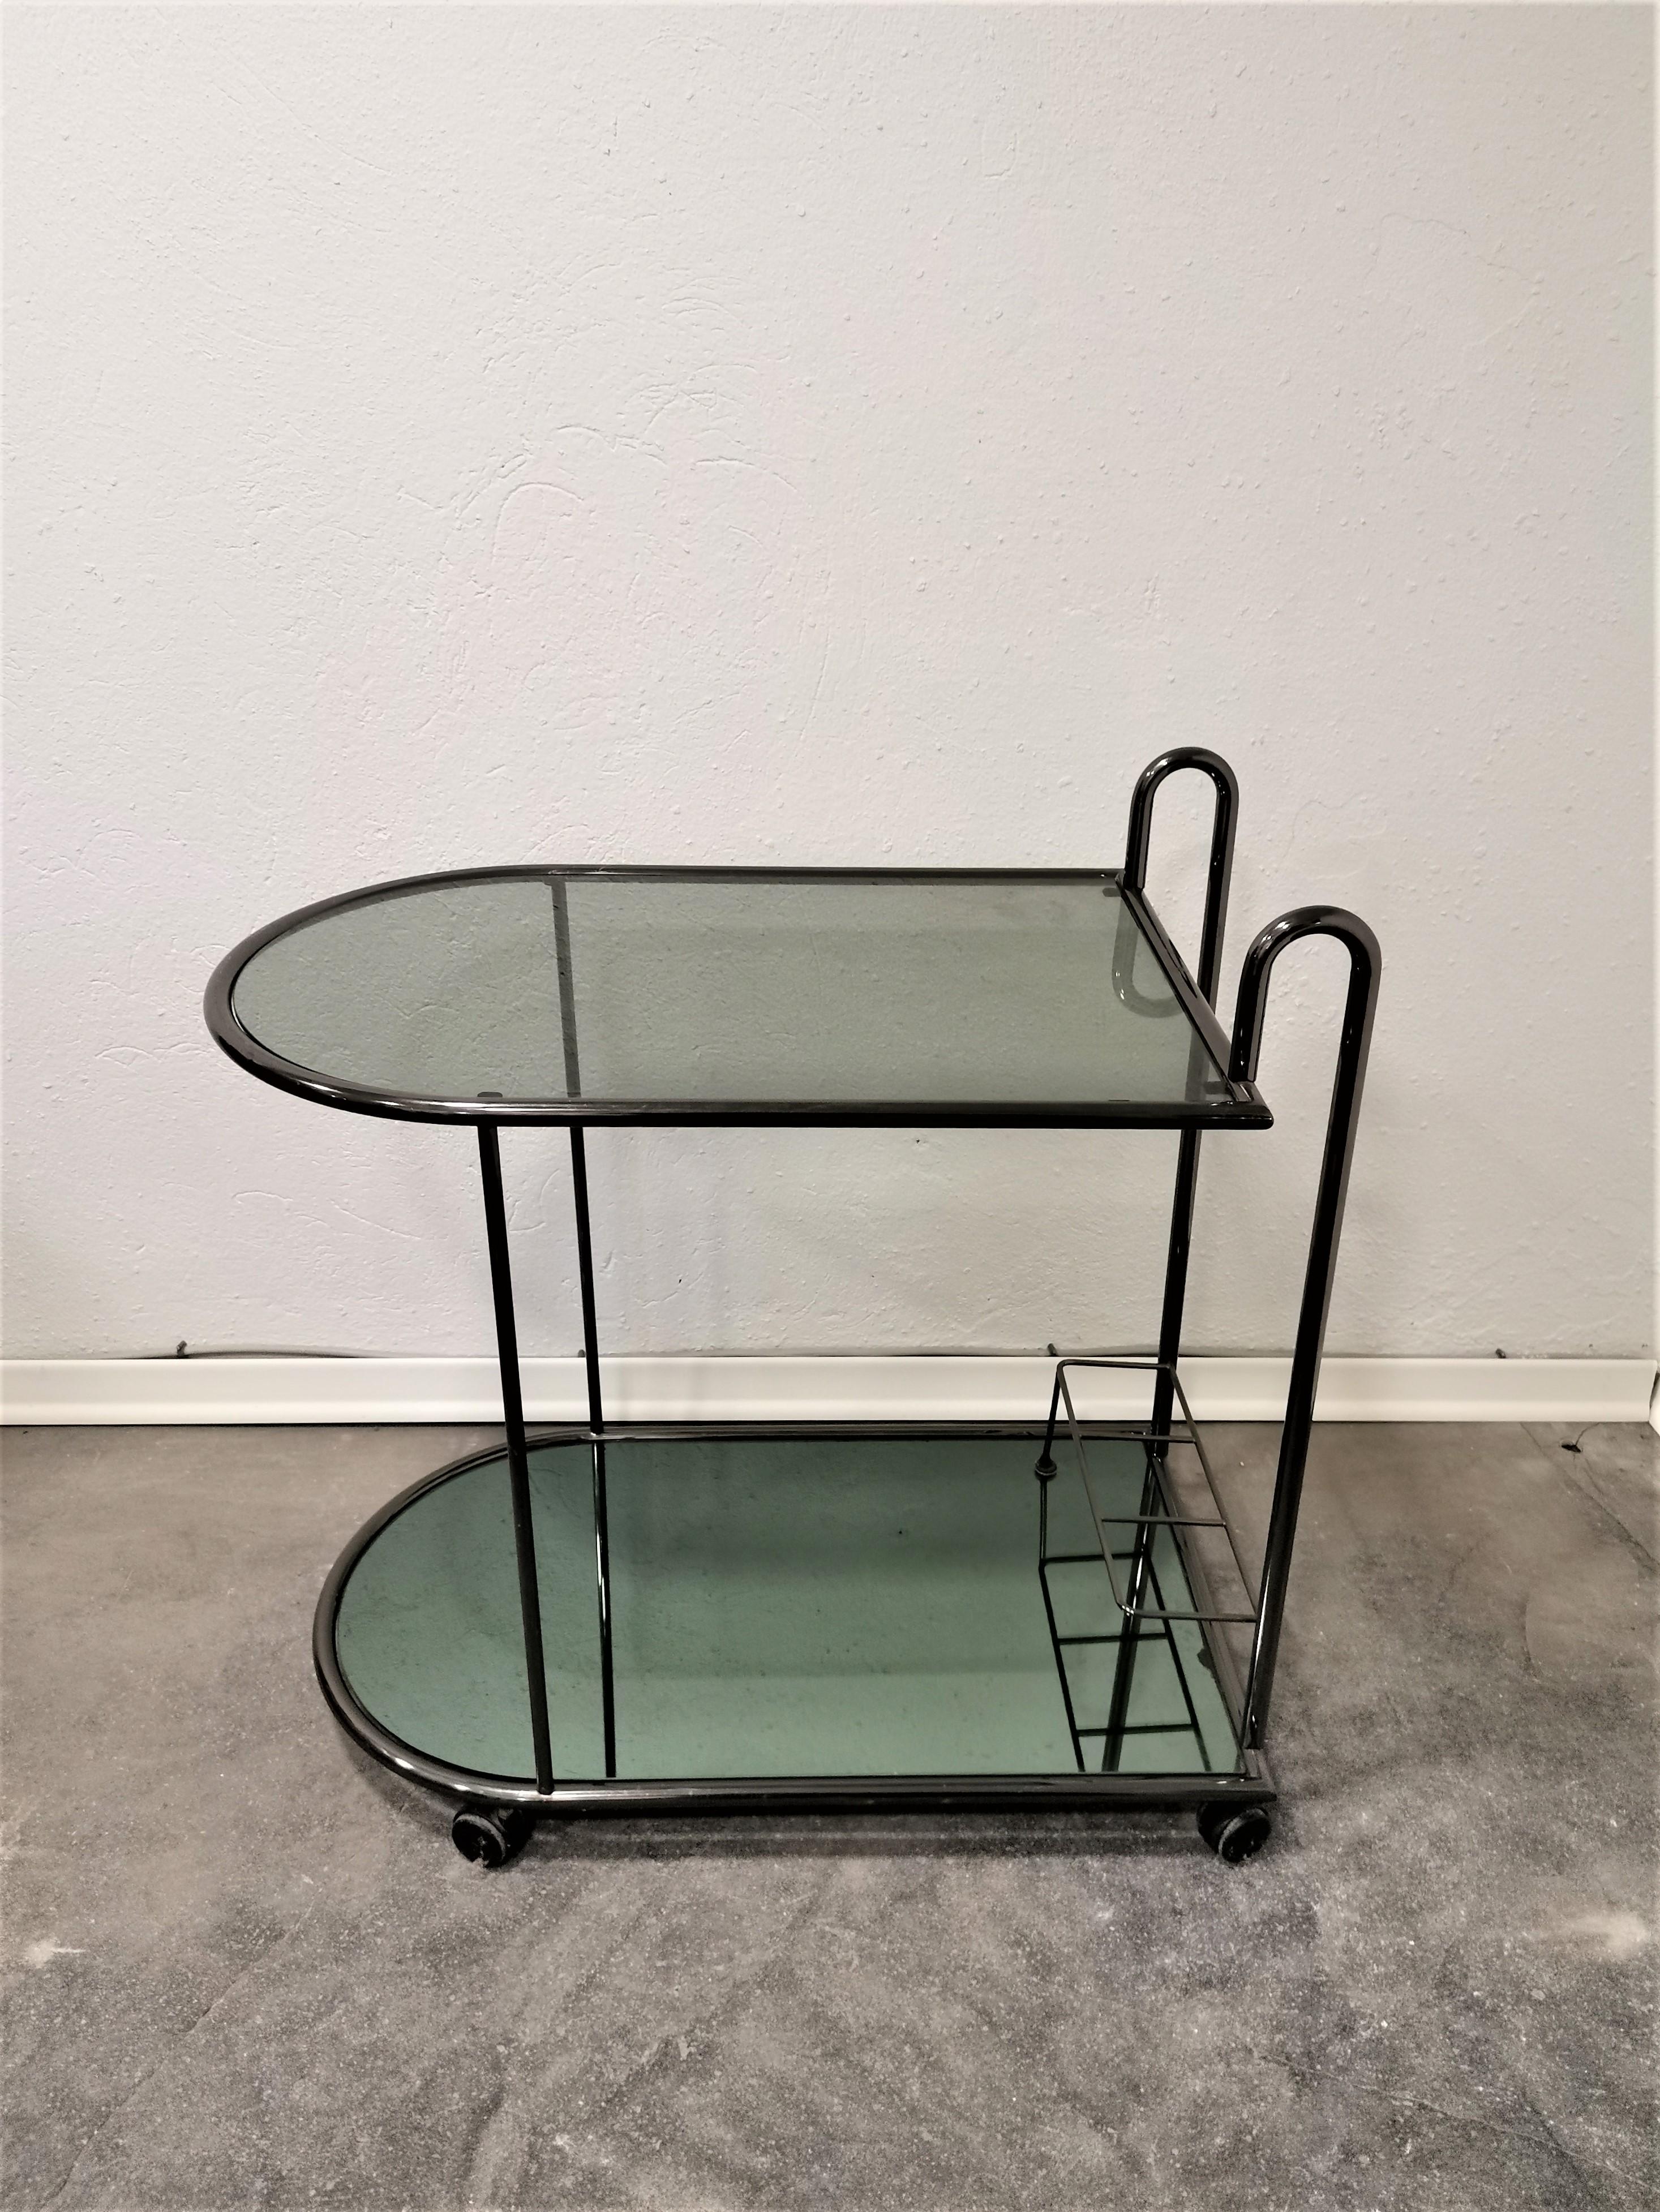 Bar Cart, 1980s

Period: 1980s

Country of manufacturer: Italy

Style: Midcentury Modern, Classic, Industrial, Modern

Materials: chrome, smoked glass, mirror, plastic wheels

Condition: Very good vintage condition. All parts are original. Some